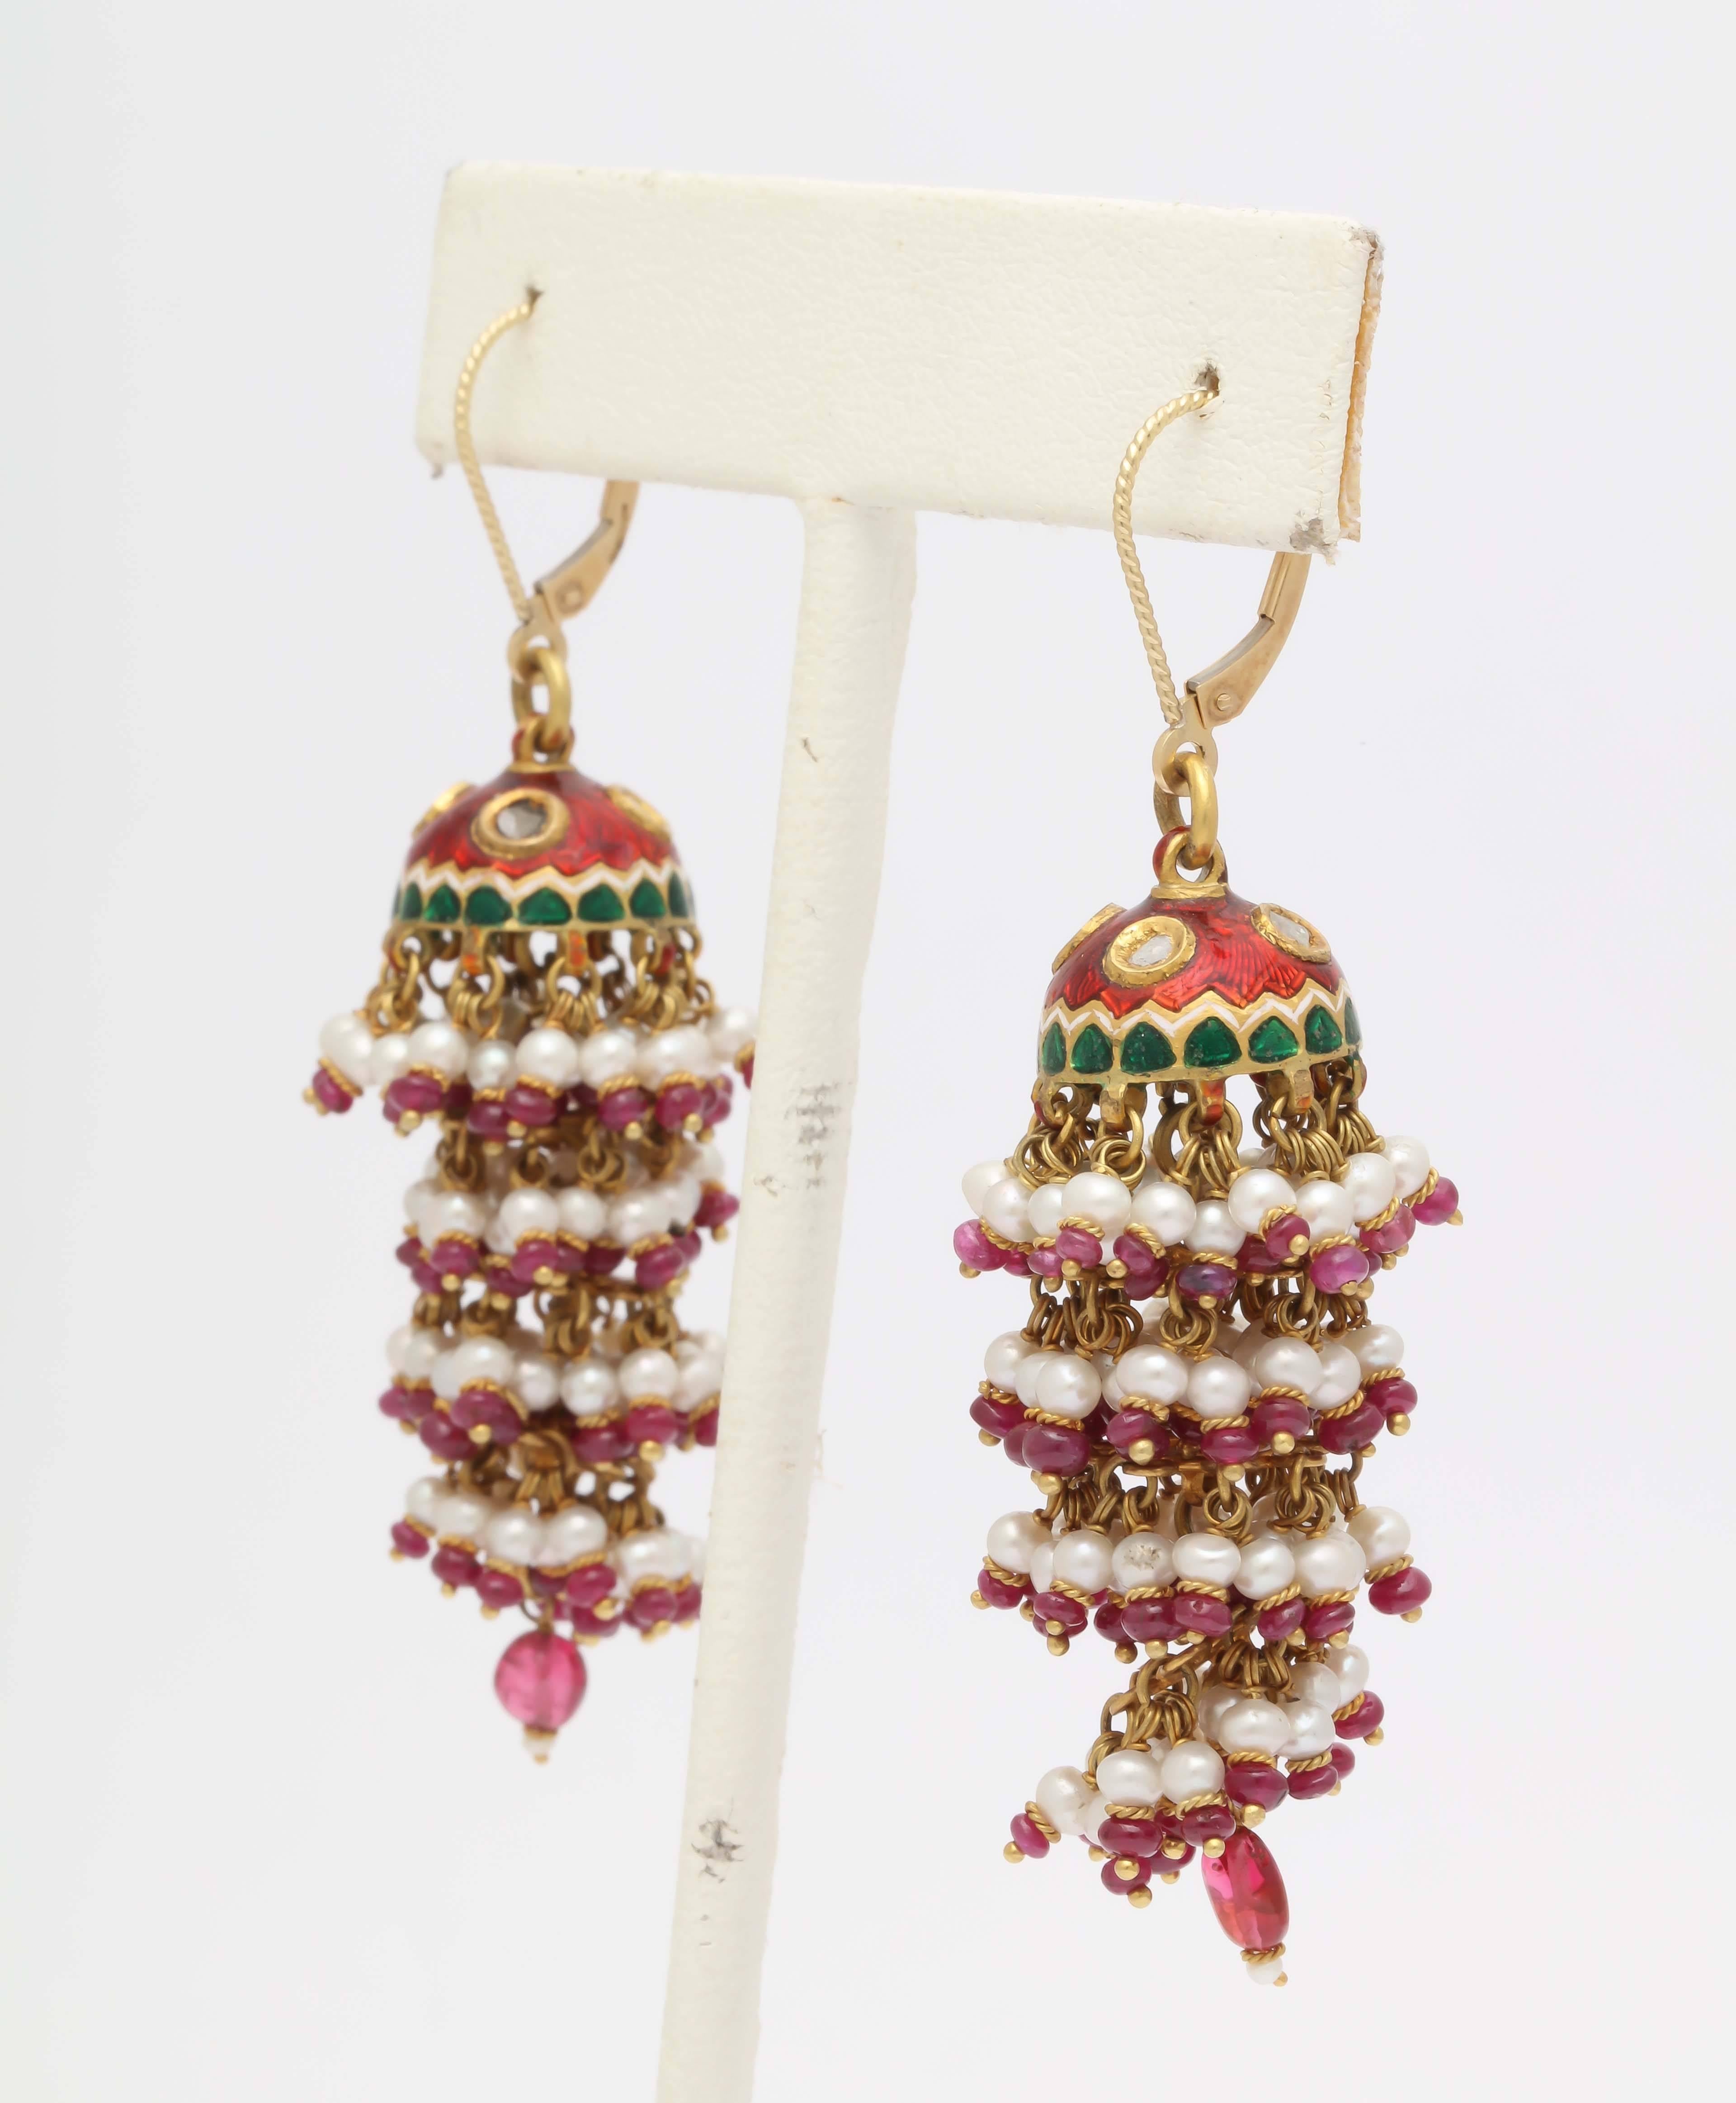 These stunning layered earrings are handmade in India. The caps are 18kt gold , diamond slices and enameled with red and green enamel in the traditional style of Northern India. Each dangle is hand wired with pearls, rubies and 18 kt gold. The